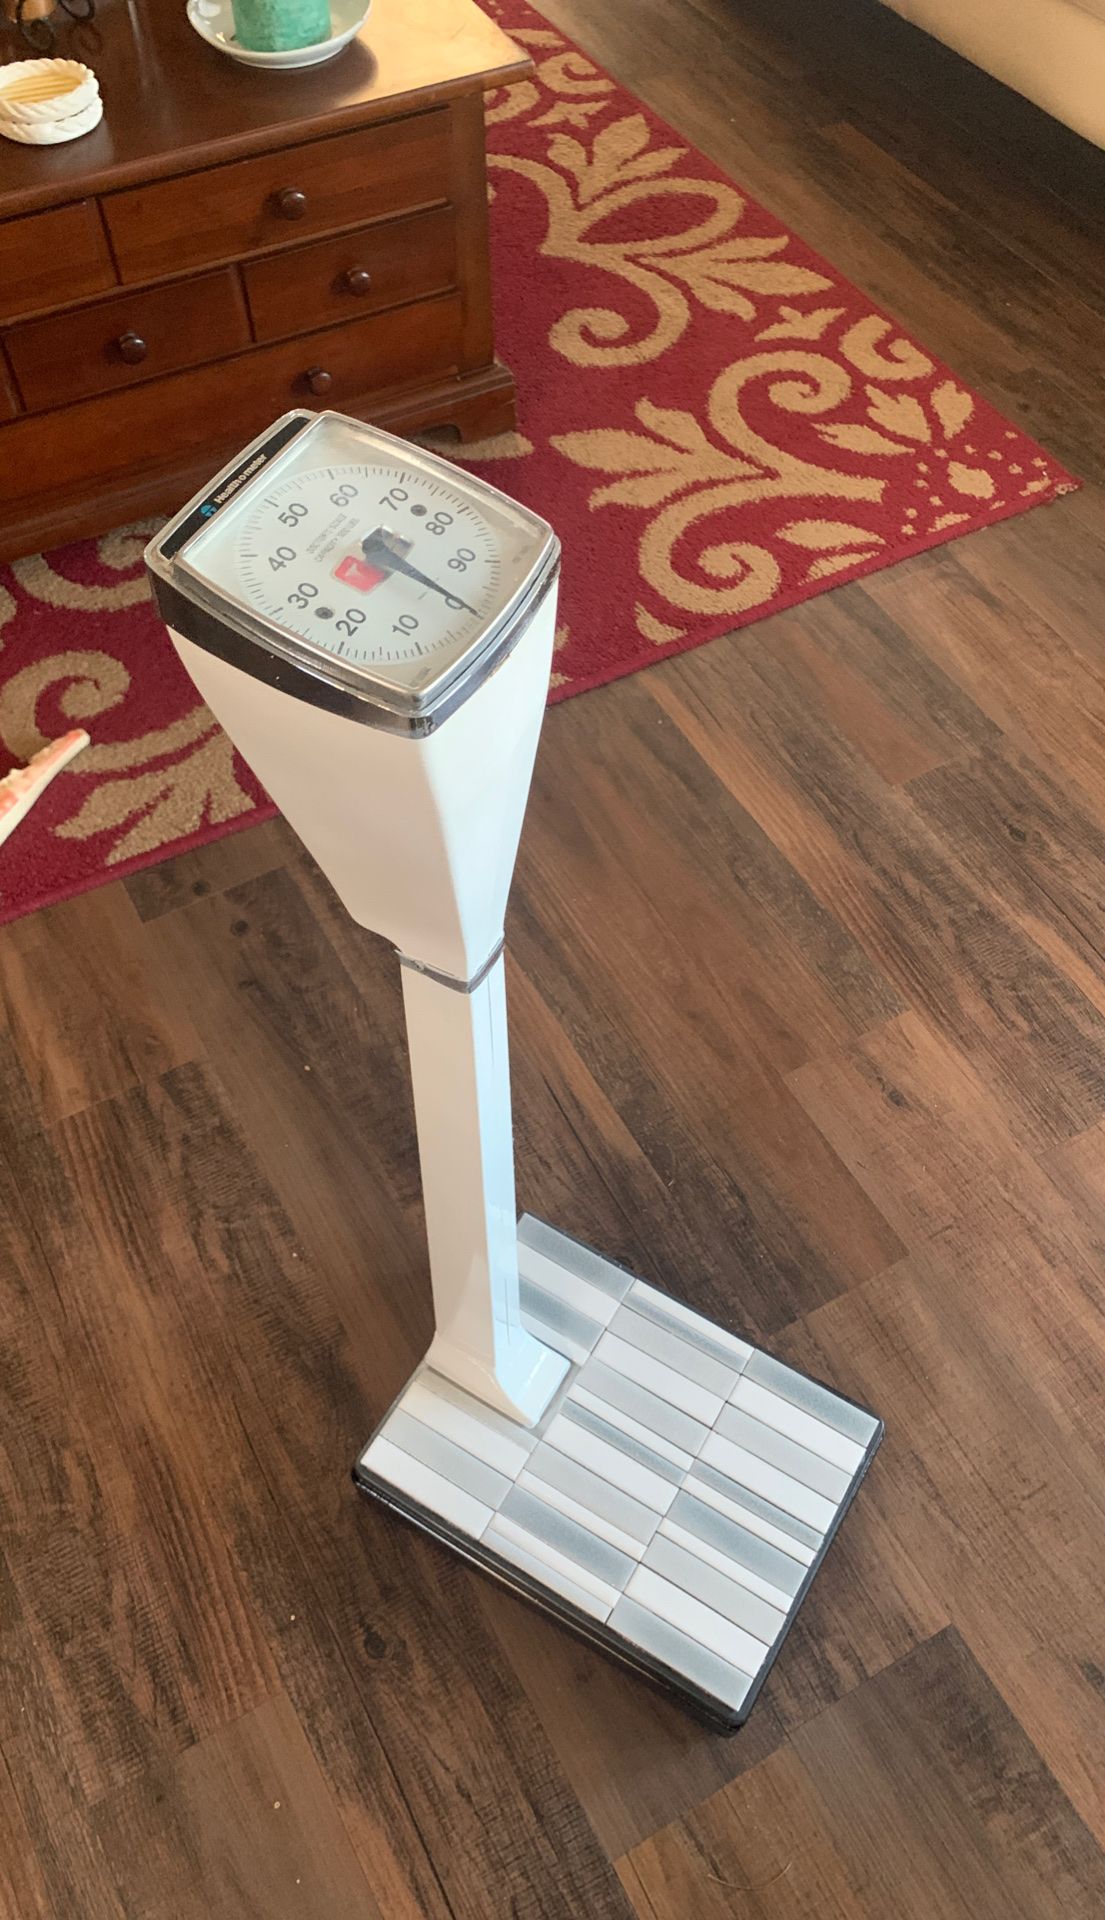 “Health O Meter SCALE “ Doctors Scale Capacity 300 lbs.